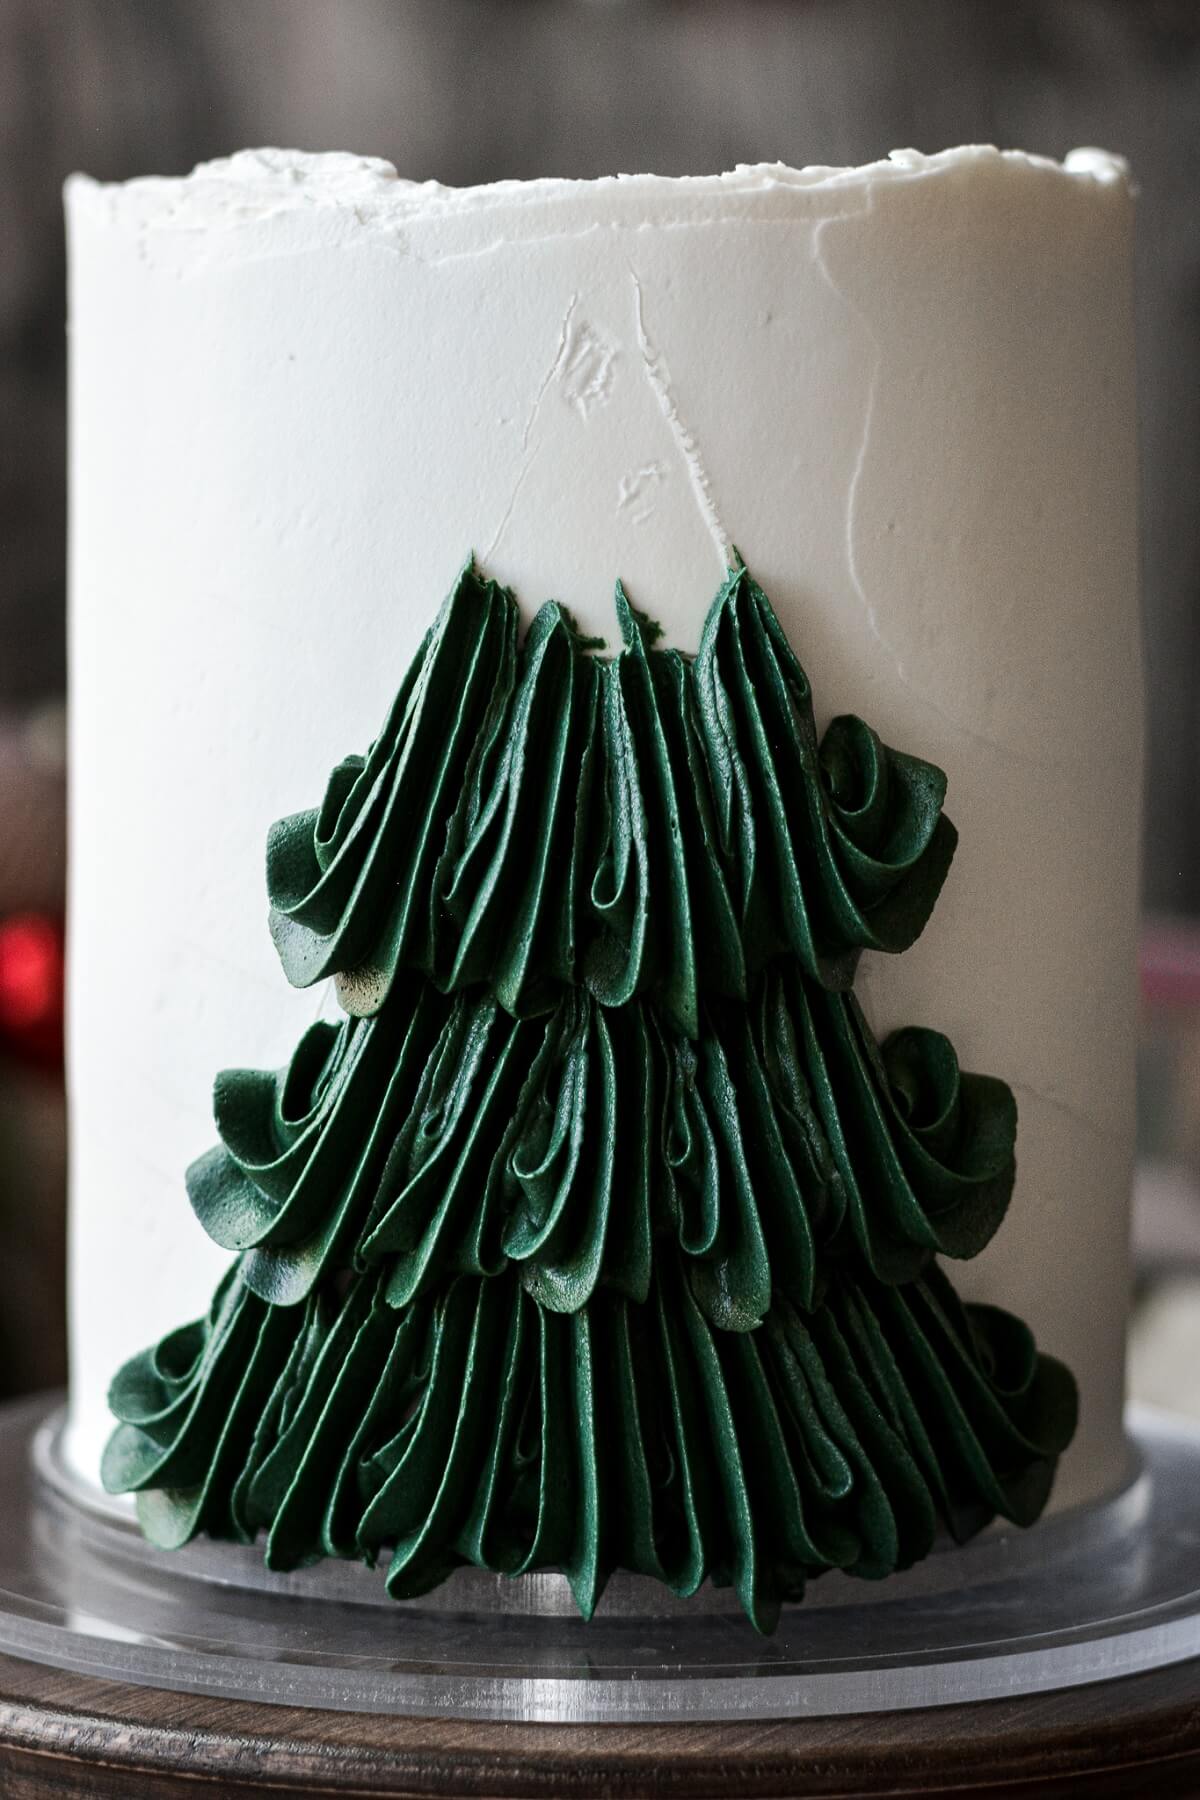 Step 7 for decorating a buttercream Christmas tree cake.